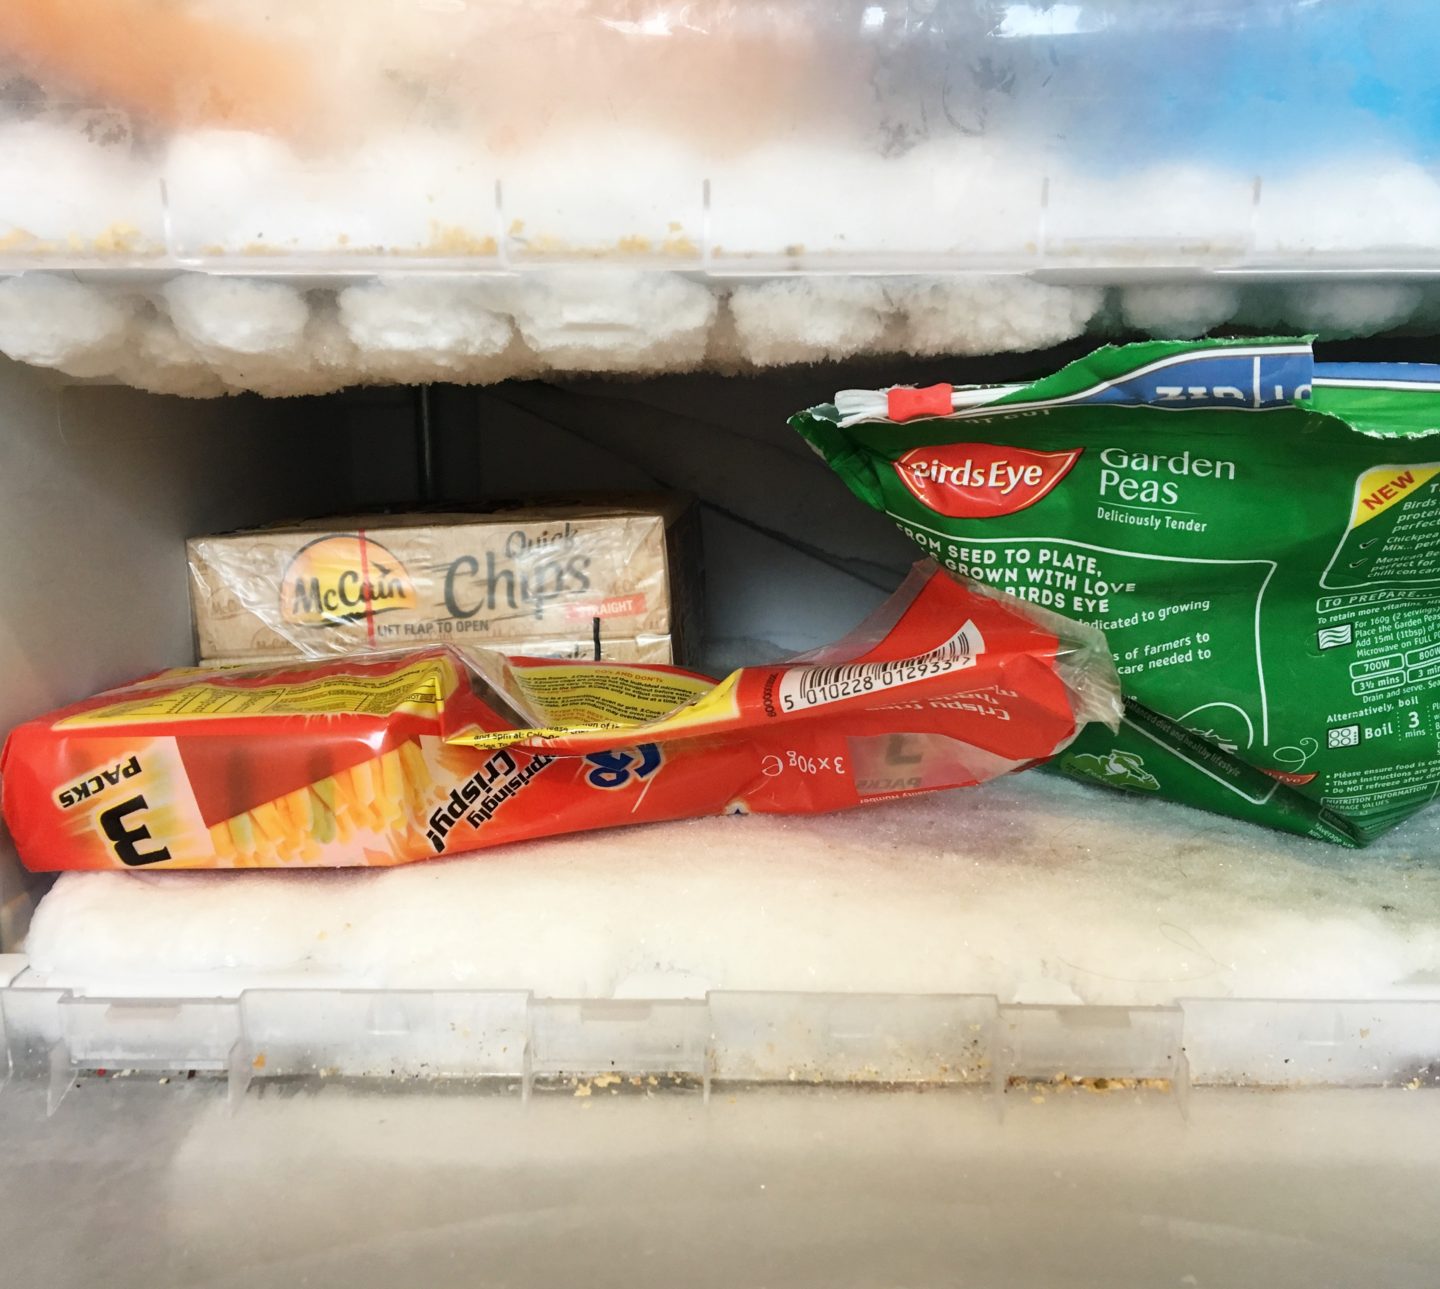 How to defrost a freezer